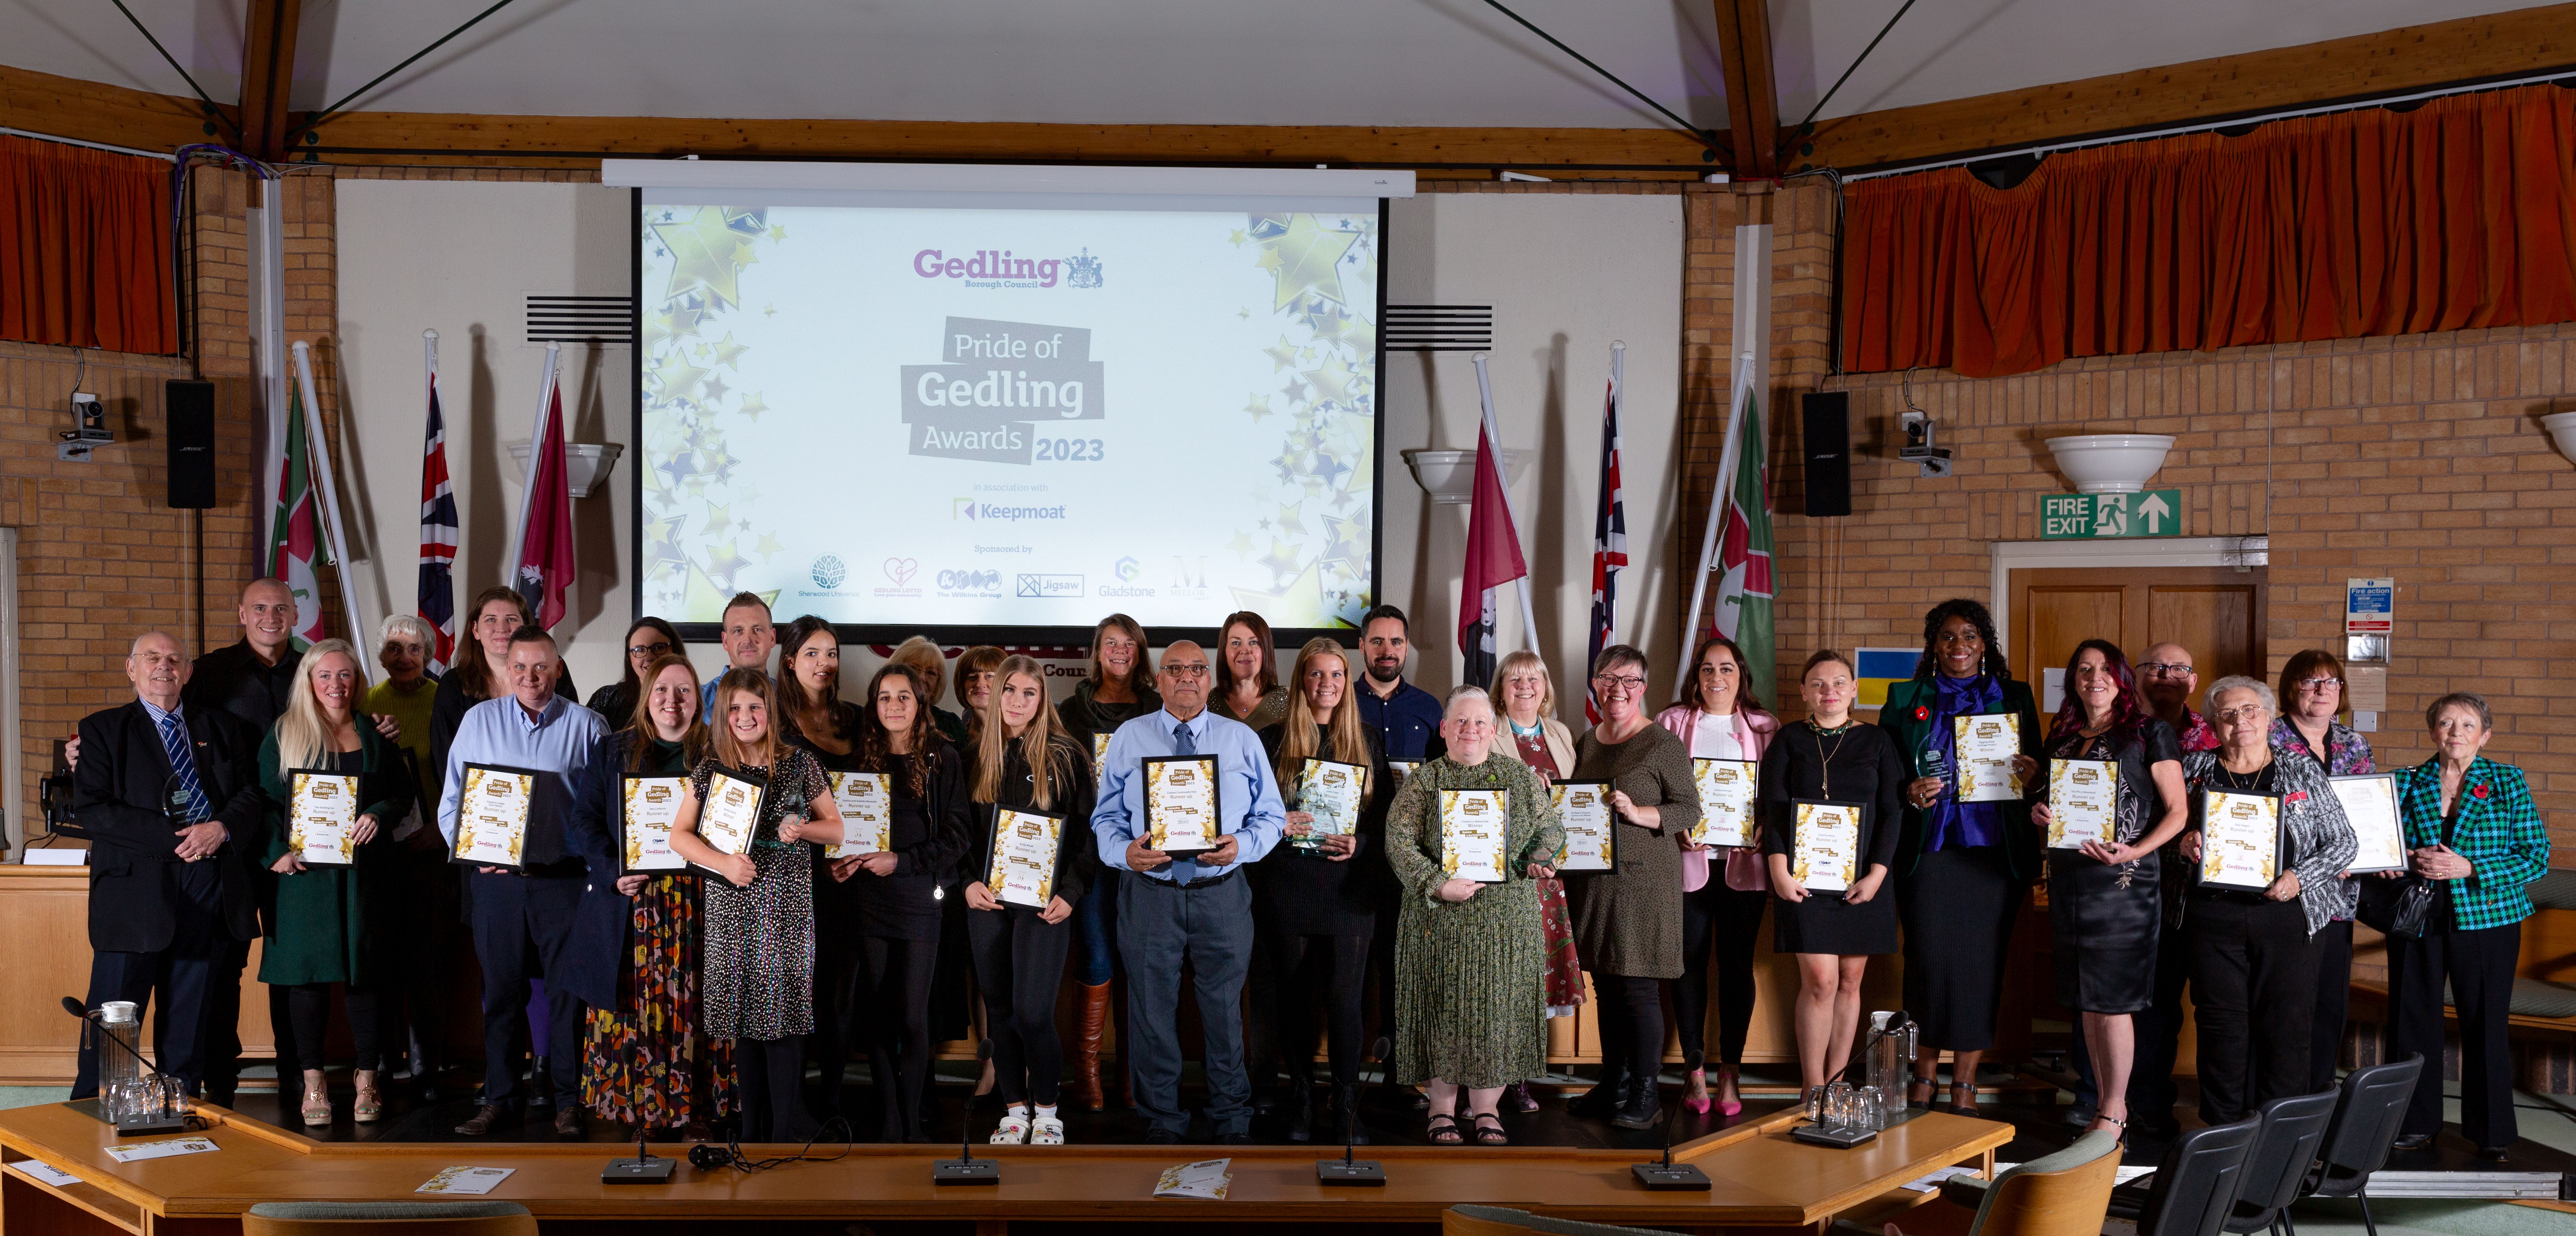 A large group of people stood in a row holding awards and certificates for the Pride of Gedling Awards 2023. The group are stood in front of a large projector screen which has text on it reading “Pride of Gedling Awards 2023”